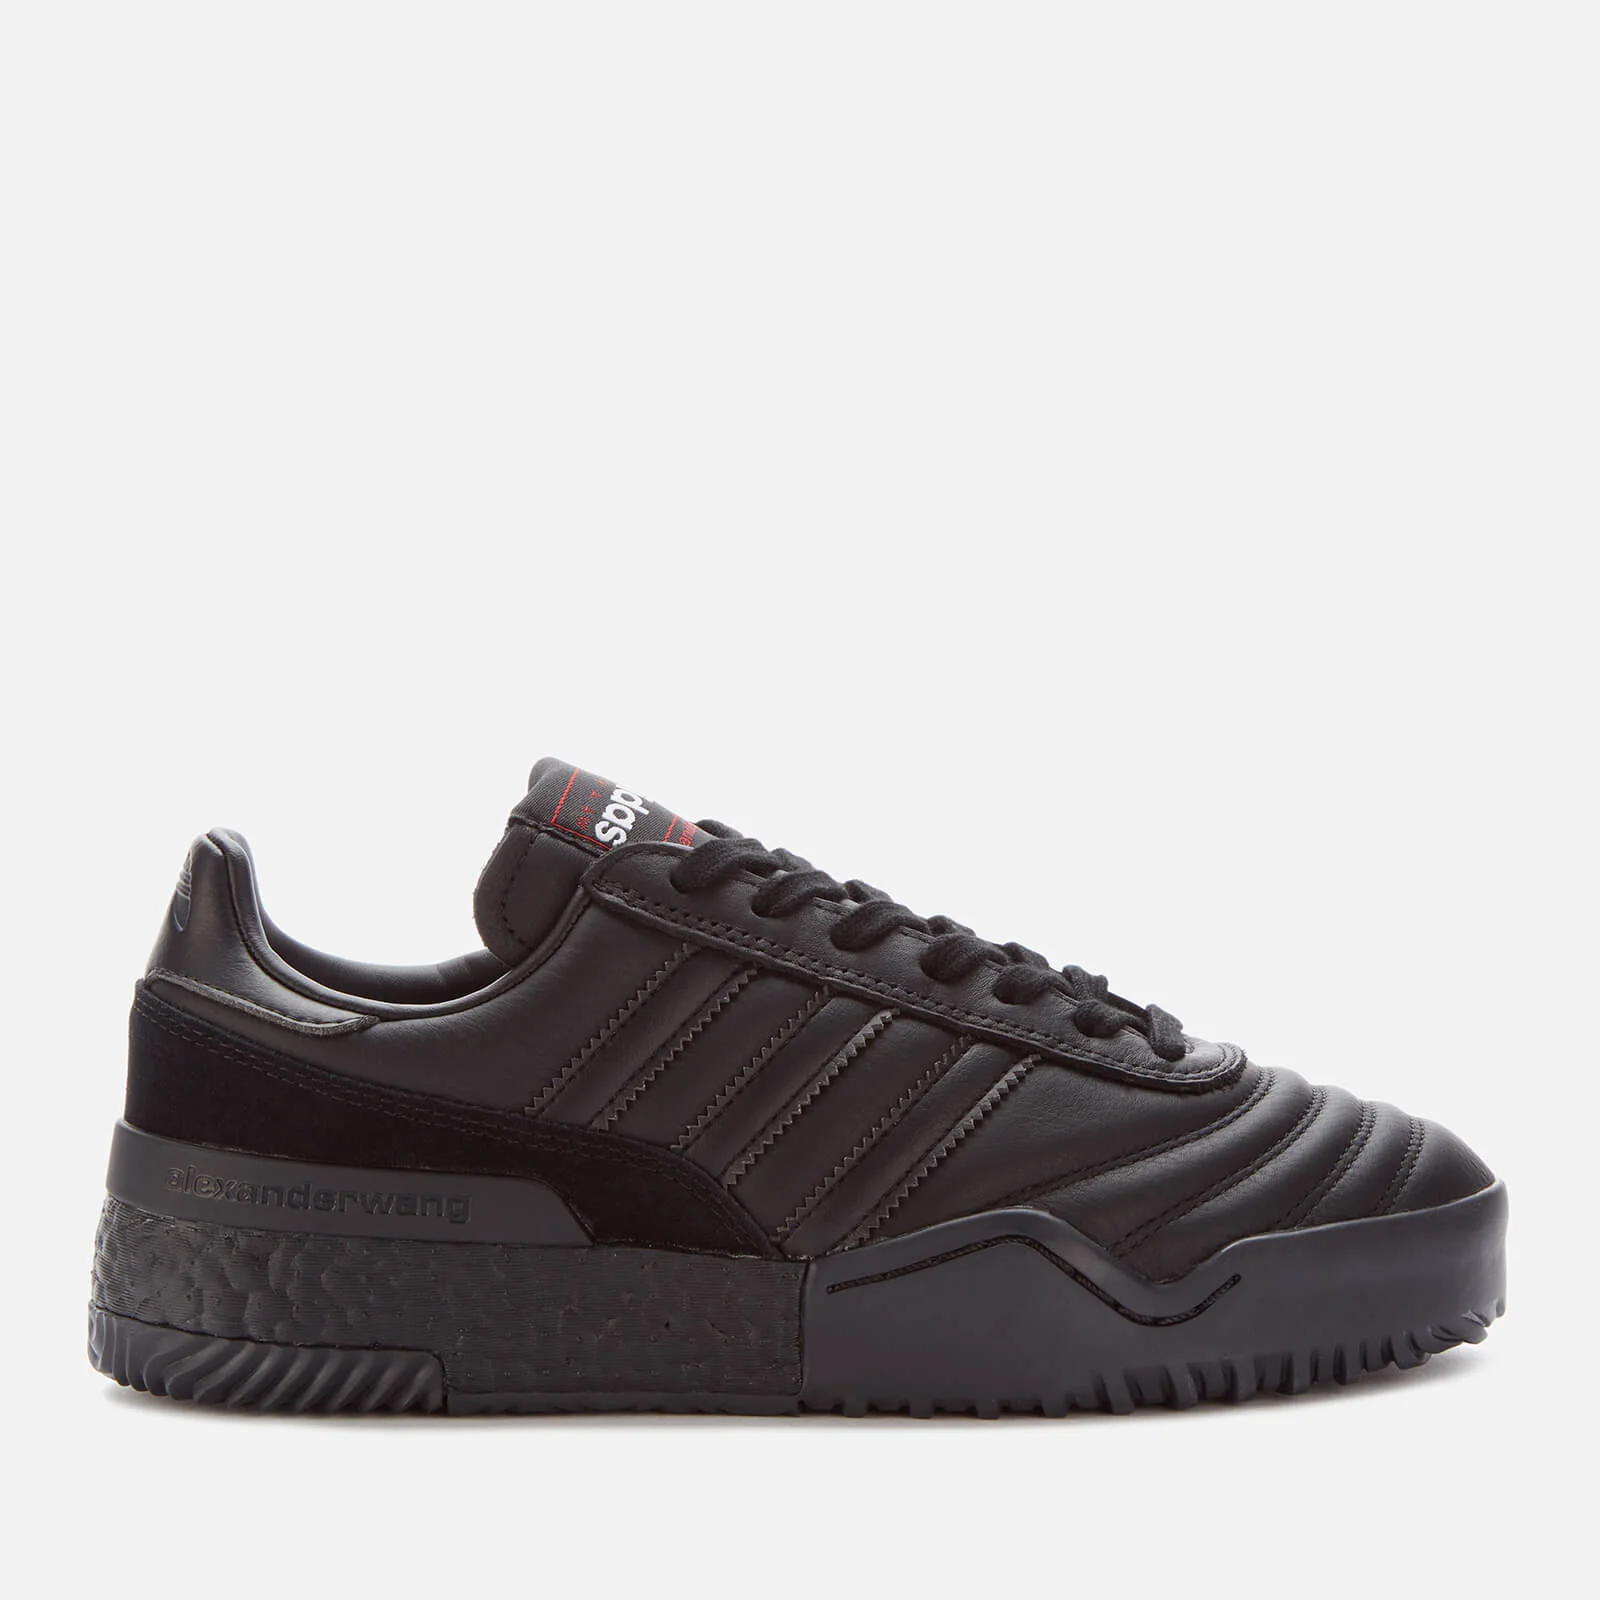 adidas Originals by Alexander Wang Bball Soccer Trainers - Black Image 1